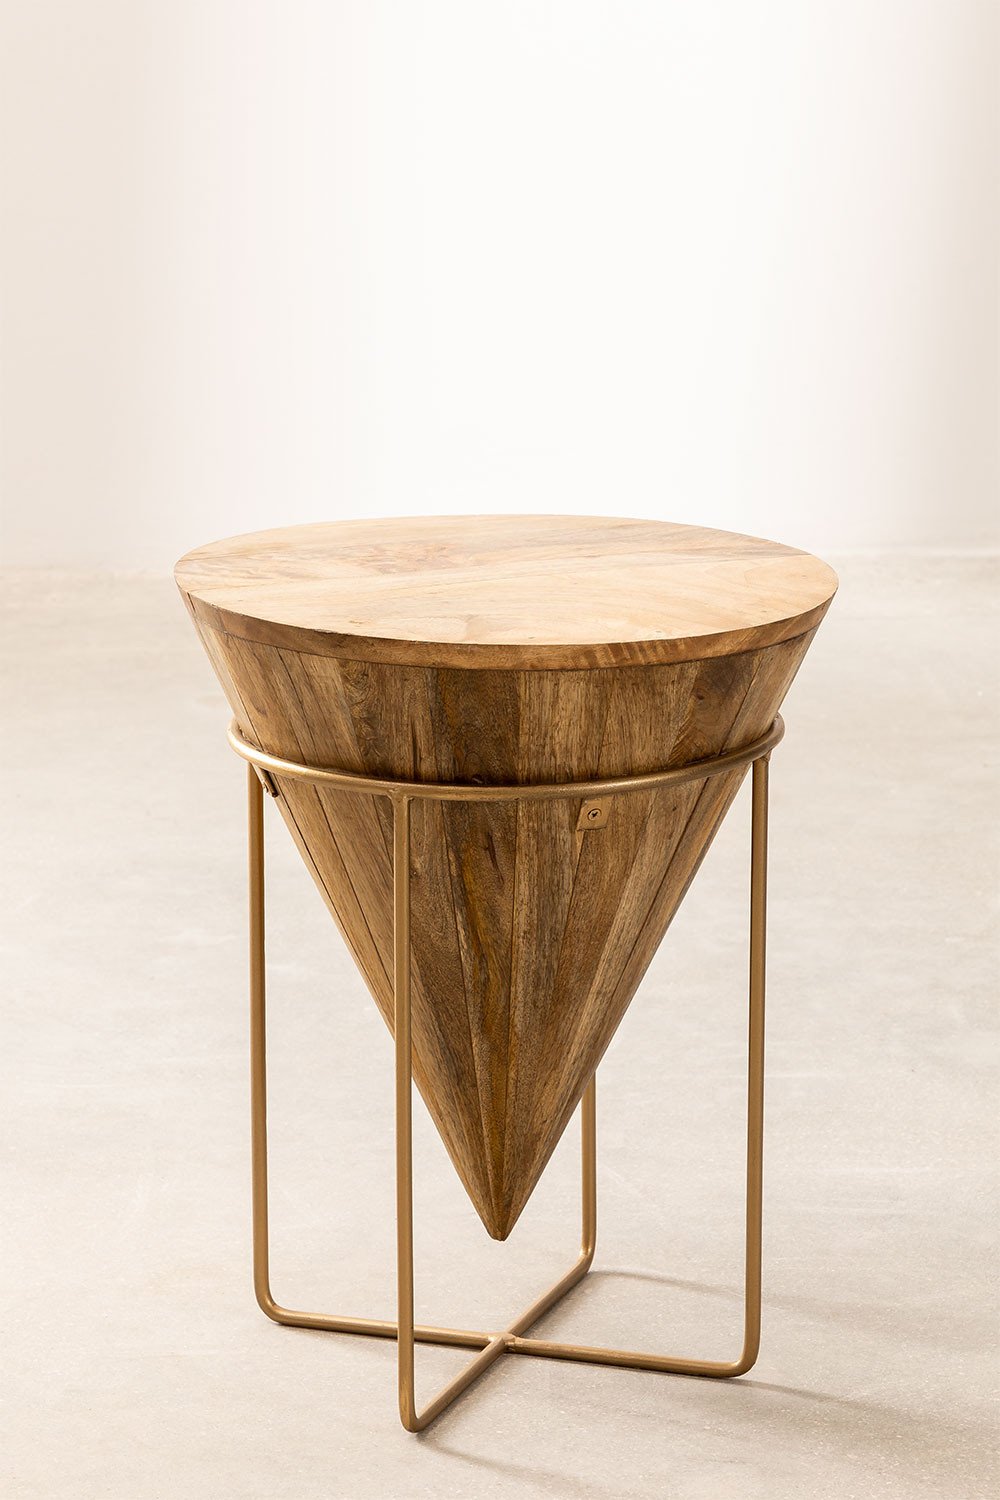 Piram Style side table, gallery image 2